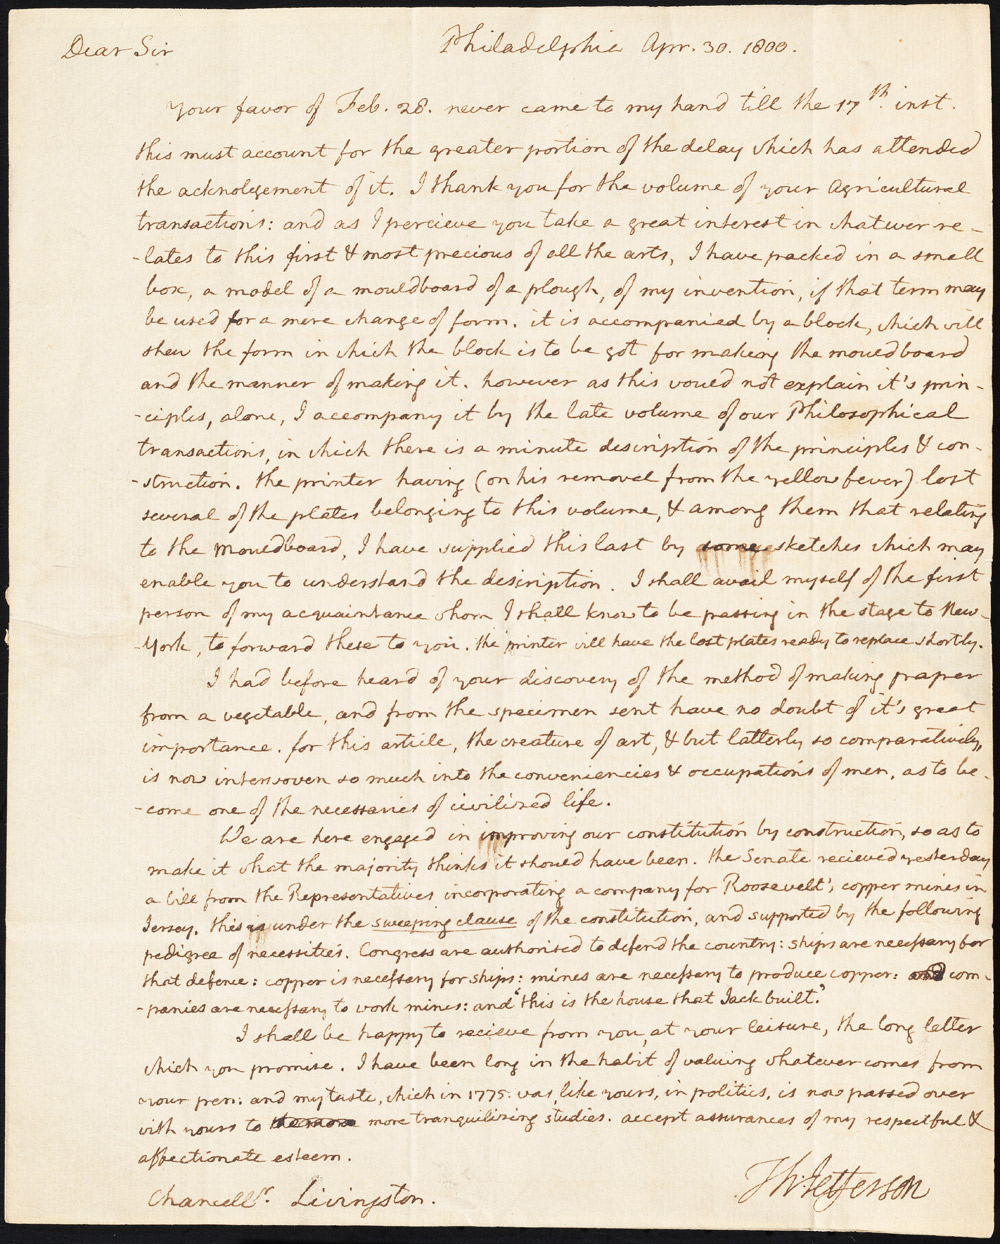 Letter to Chancellor Robert R. Livingston from Thomas Jefferson, April 30, 1800